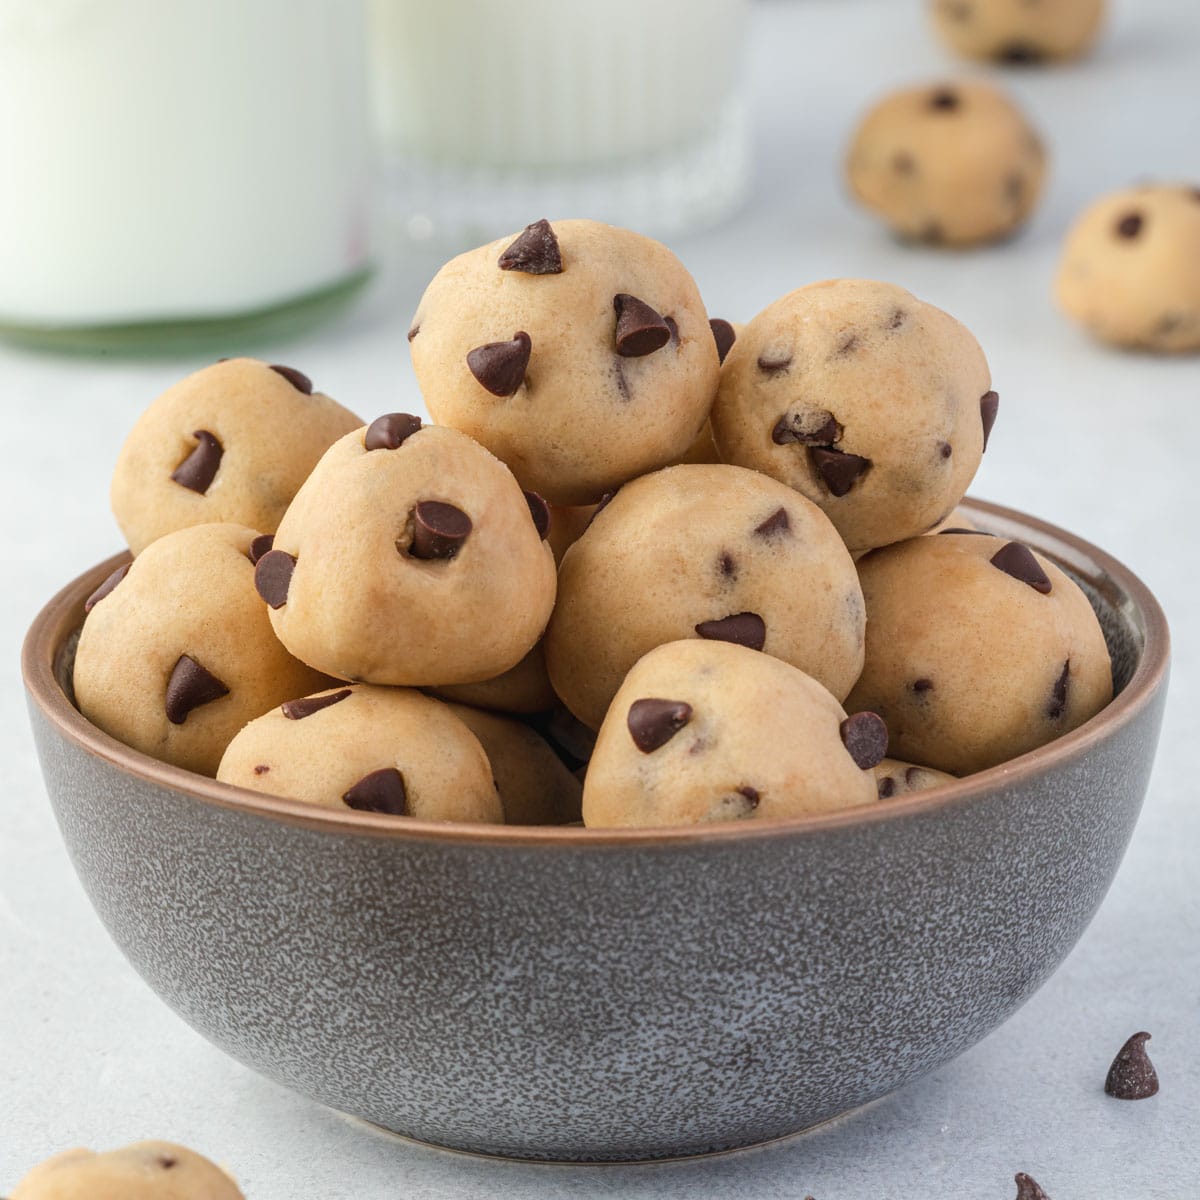 Fresh Baked Cookies and Edible Cookie Dough